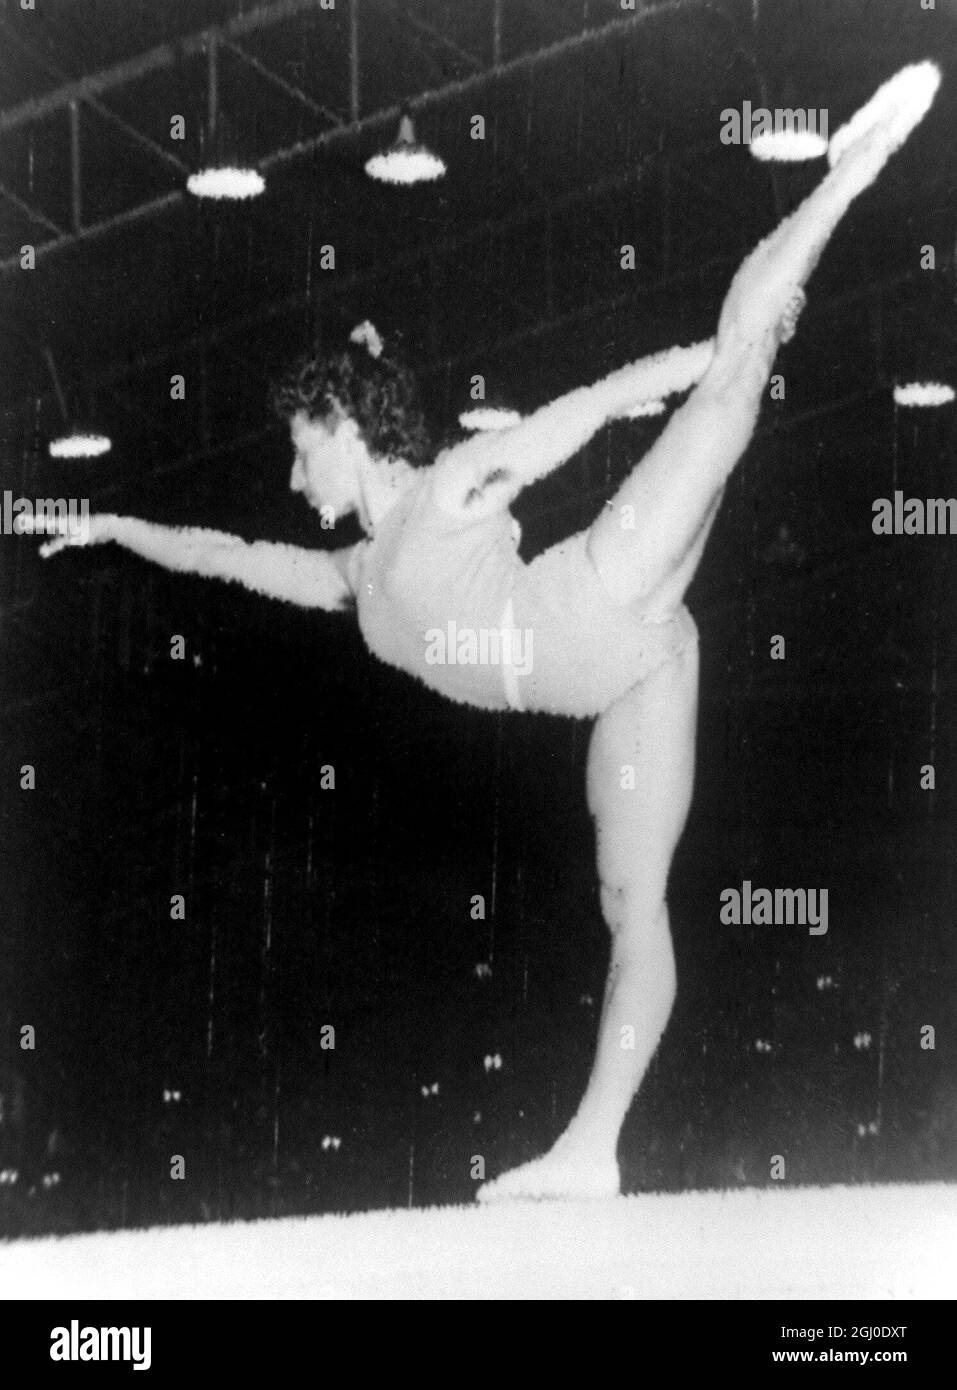 Melbourne Olympic Games 1956 Agnes Keleti of Hungary demonstrating her poise on the balance beam in which she won the gold medal. She also won gold in the parallel bars and in the free standing exercises. 5th December 1956 Stock Photo